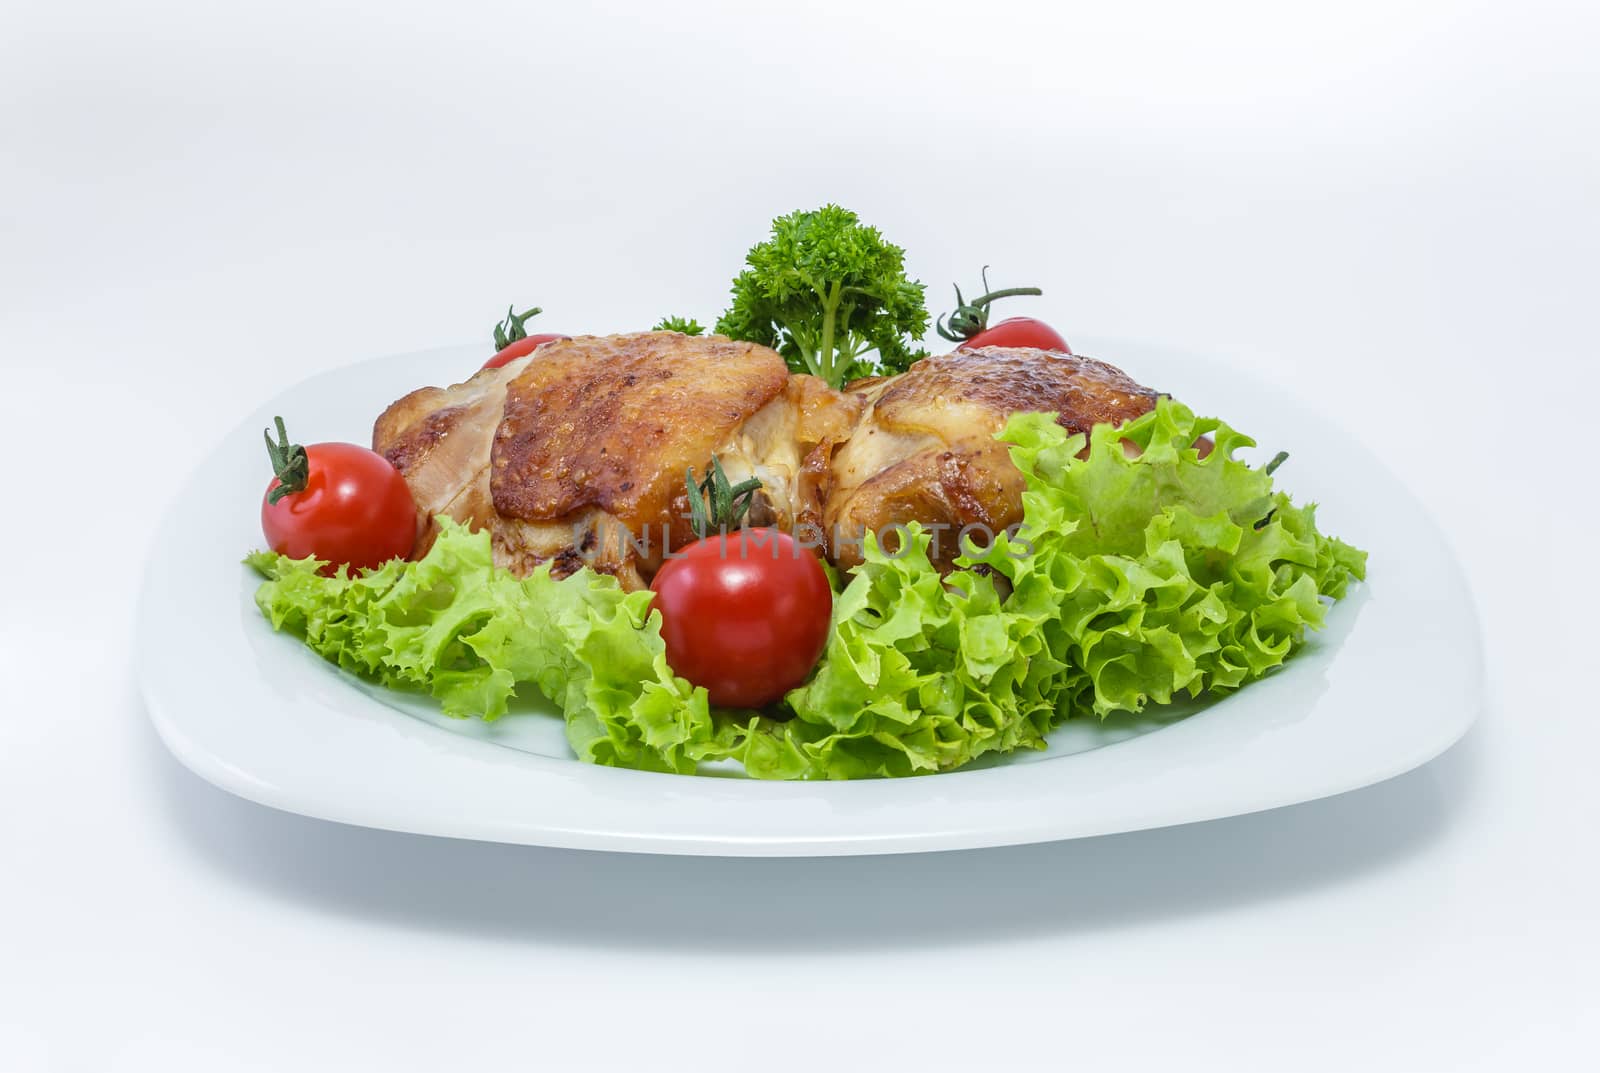 Fried chicken pieces on a plate with tomatoes, lettuce and parsley. Taken on a sheet of white plastic. Is not an isolate.